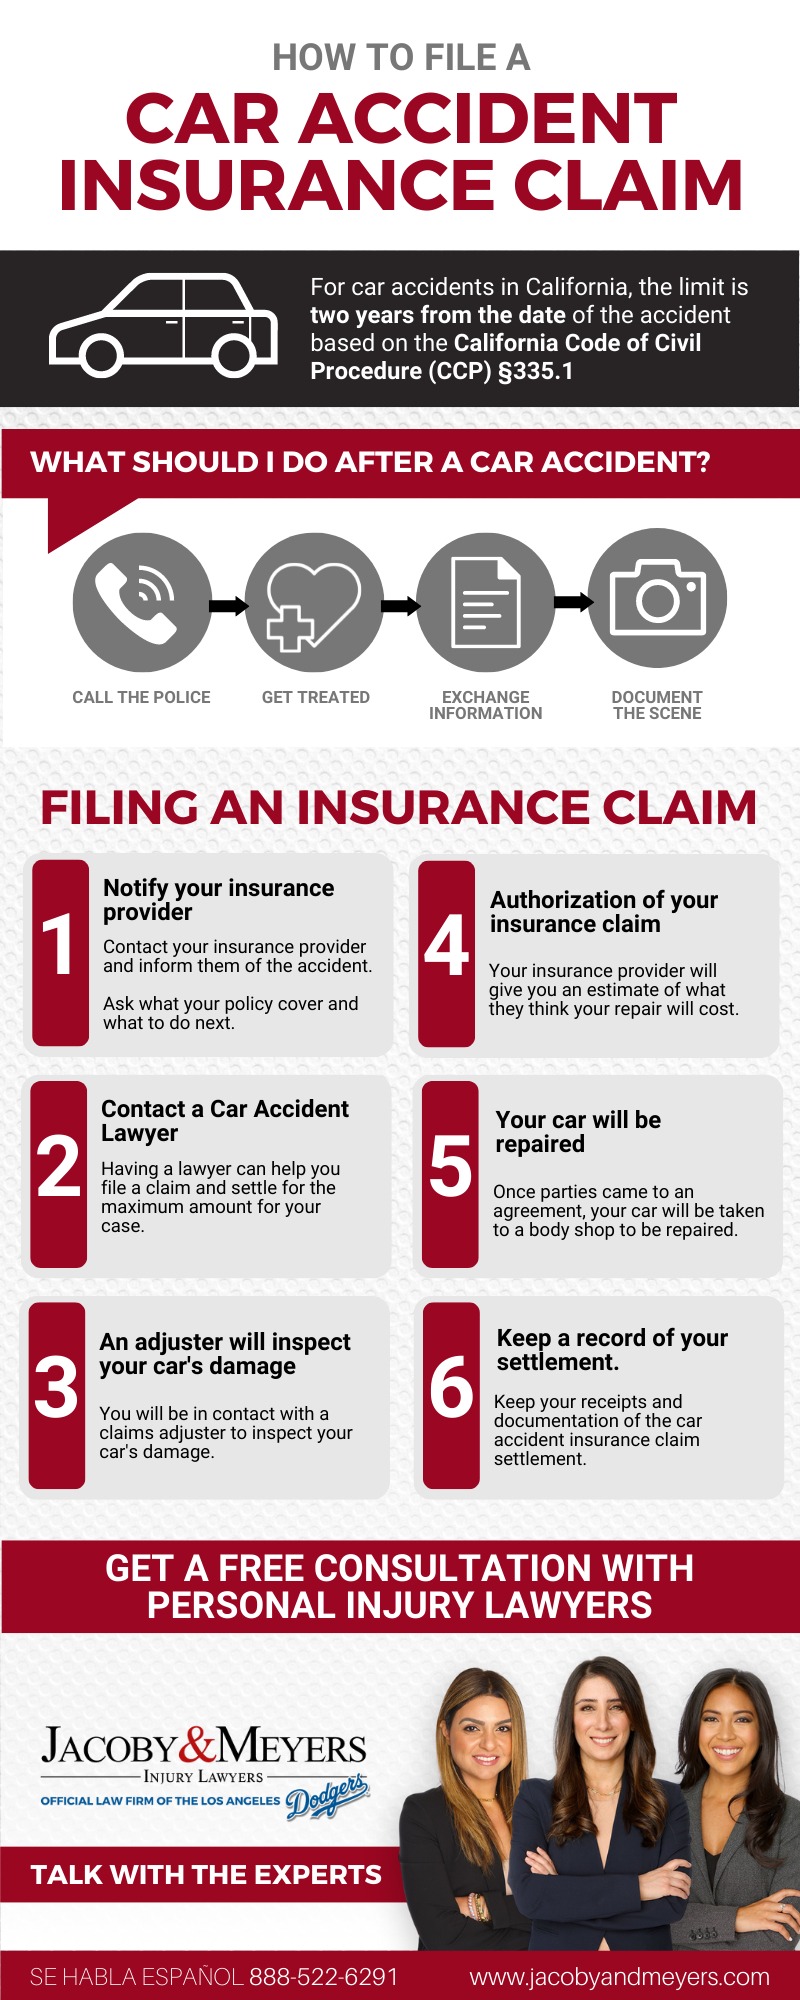 how to file a car accident insurance claim infographic